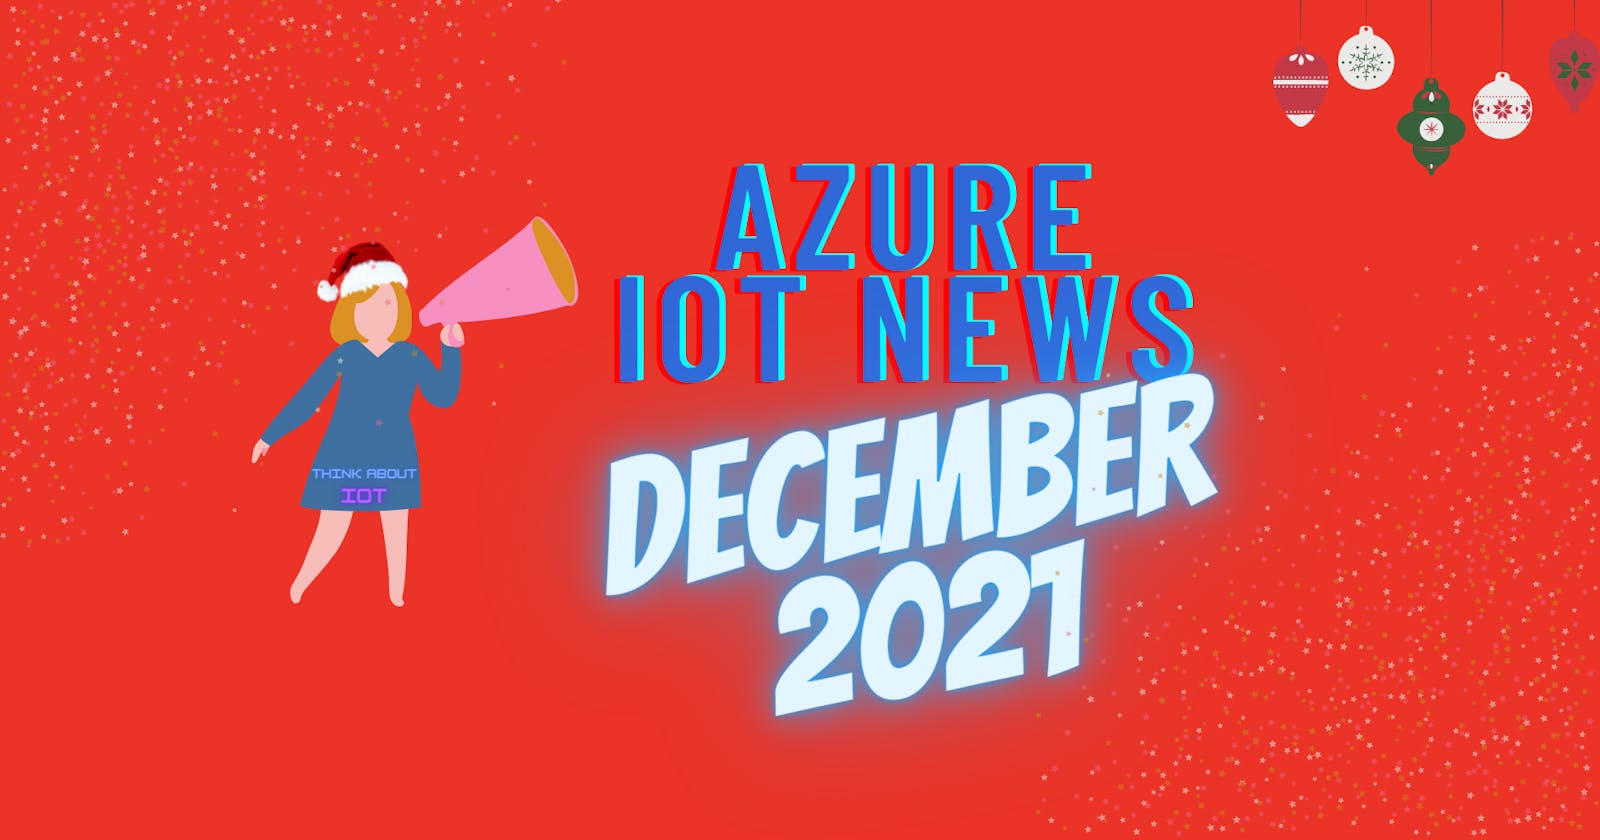 Azure IoT News – December 2021 by Think About IoT